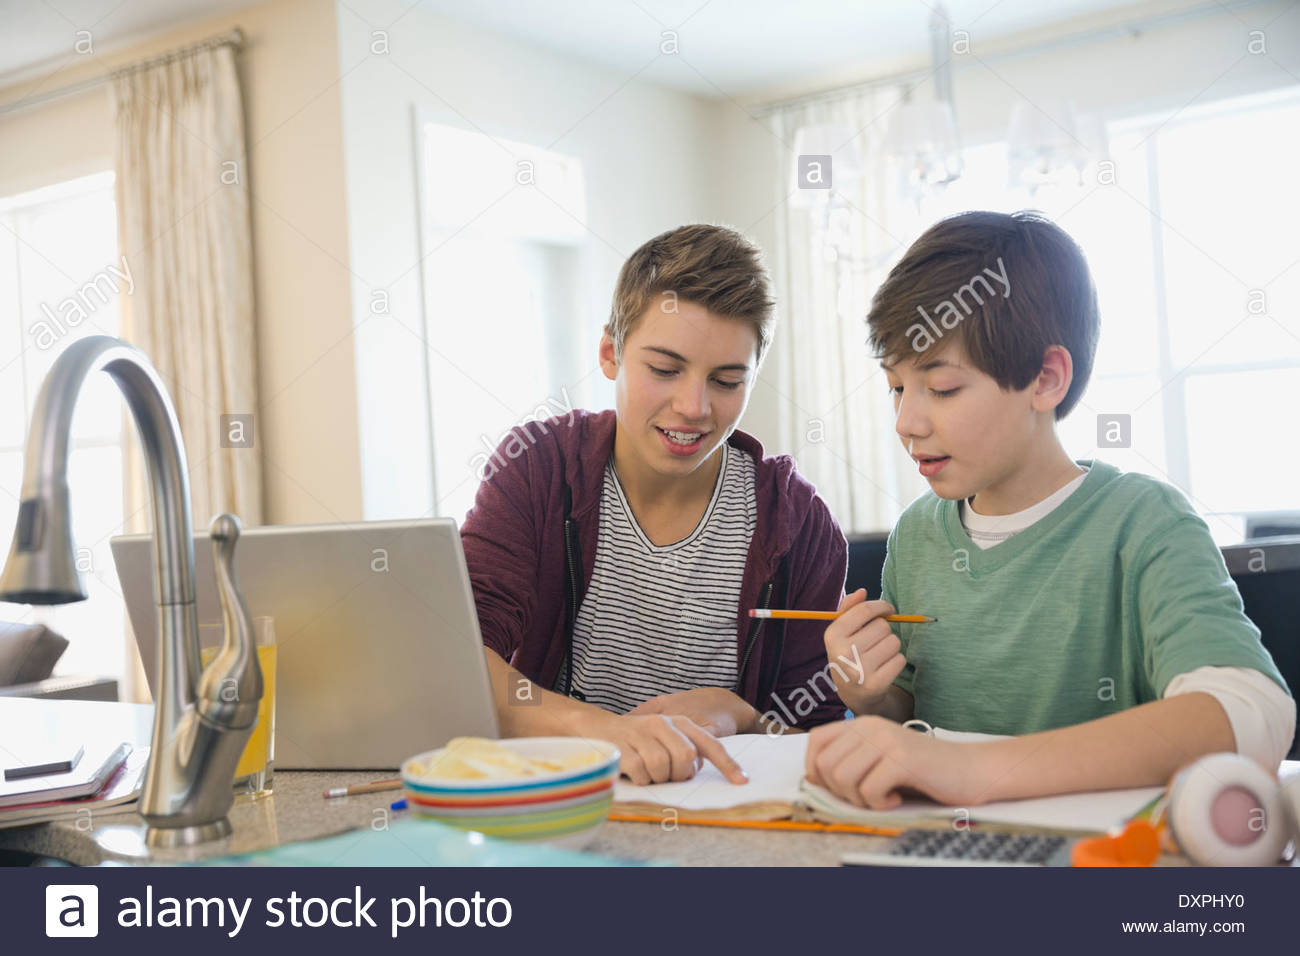 Boy assisting brother in doing homework Stock Photo